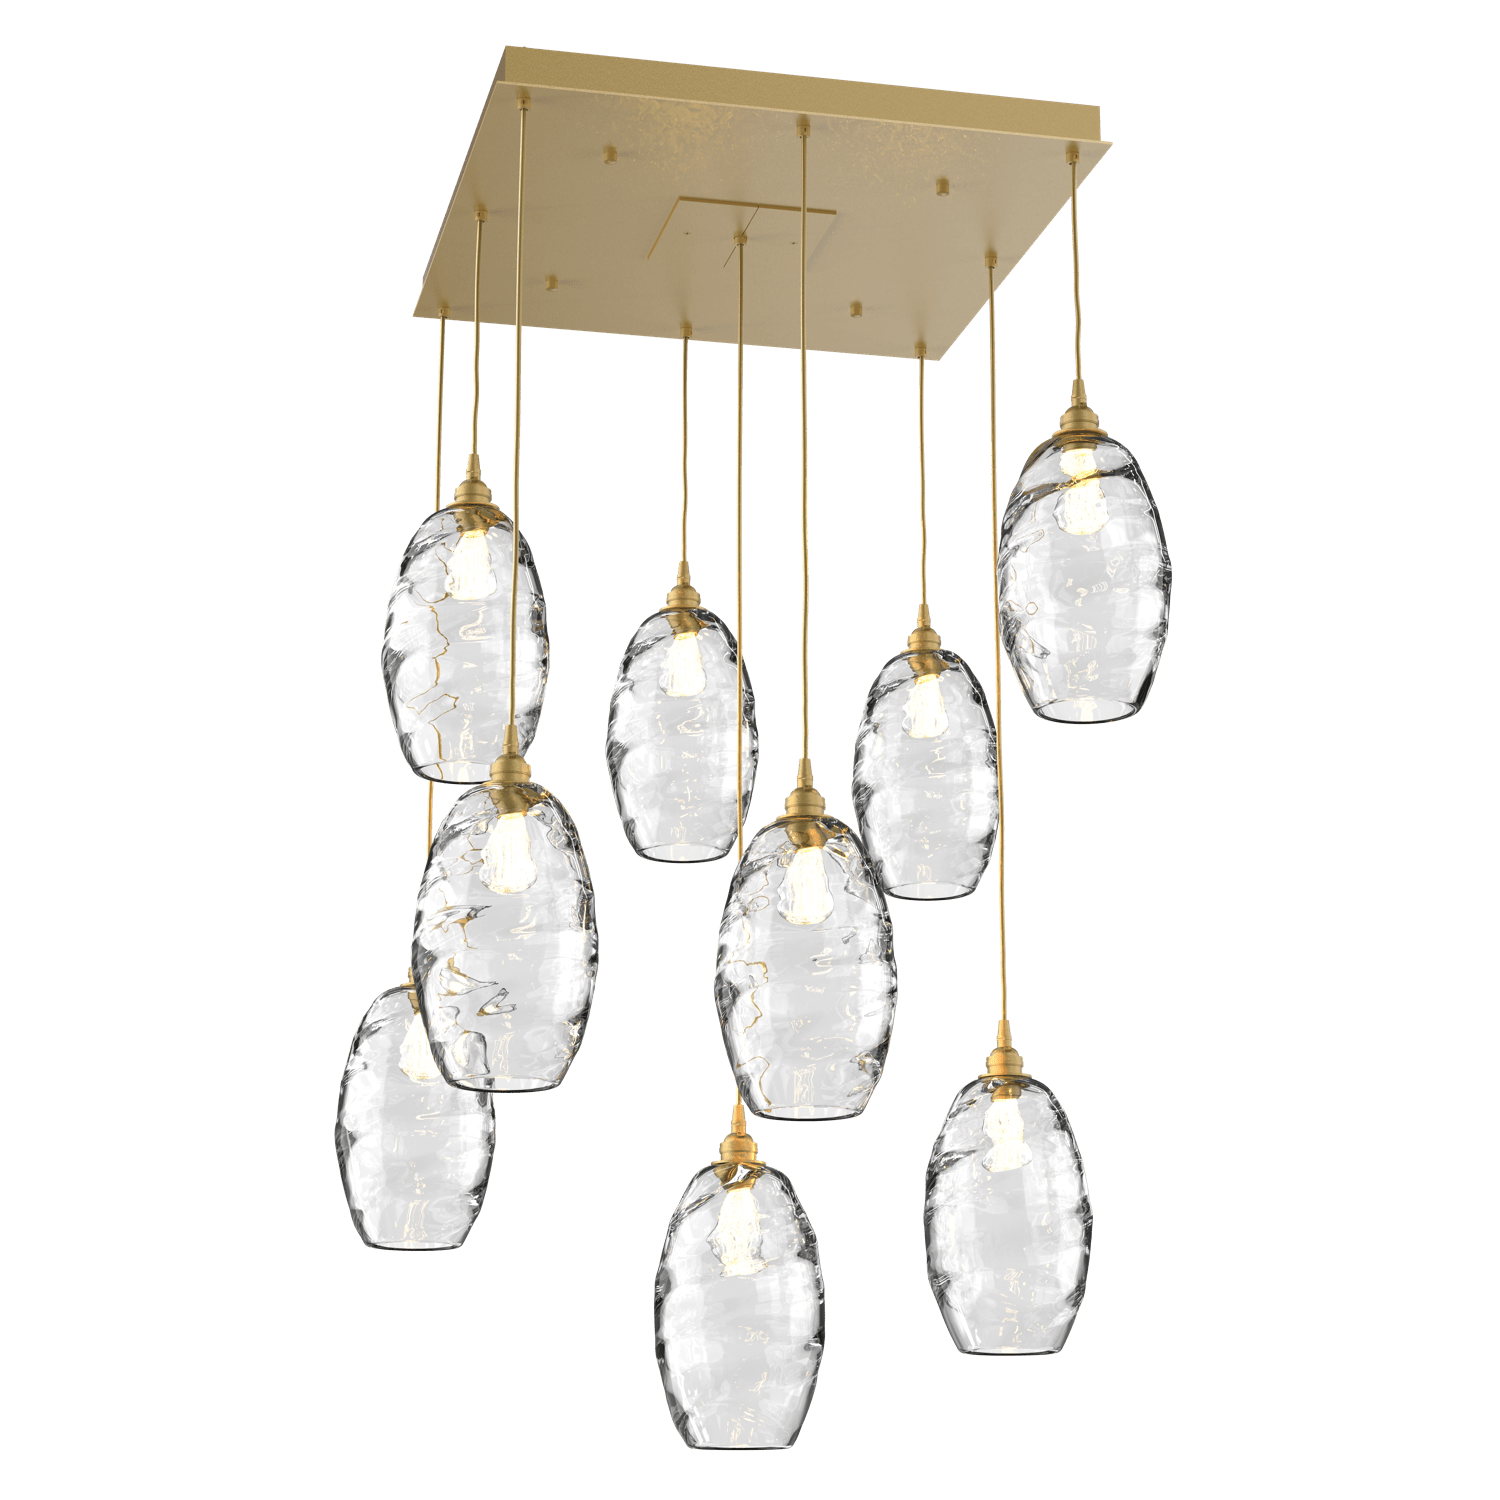 CHB0035-09-GB-OC-Hammerton-Studio-Optic-Blown-Glass-Elisse-9-light-square-pendant-chandelier-with-gilded-brass-finish-and-optic-clear-blown-glass-shades-and-incandescent-lamping